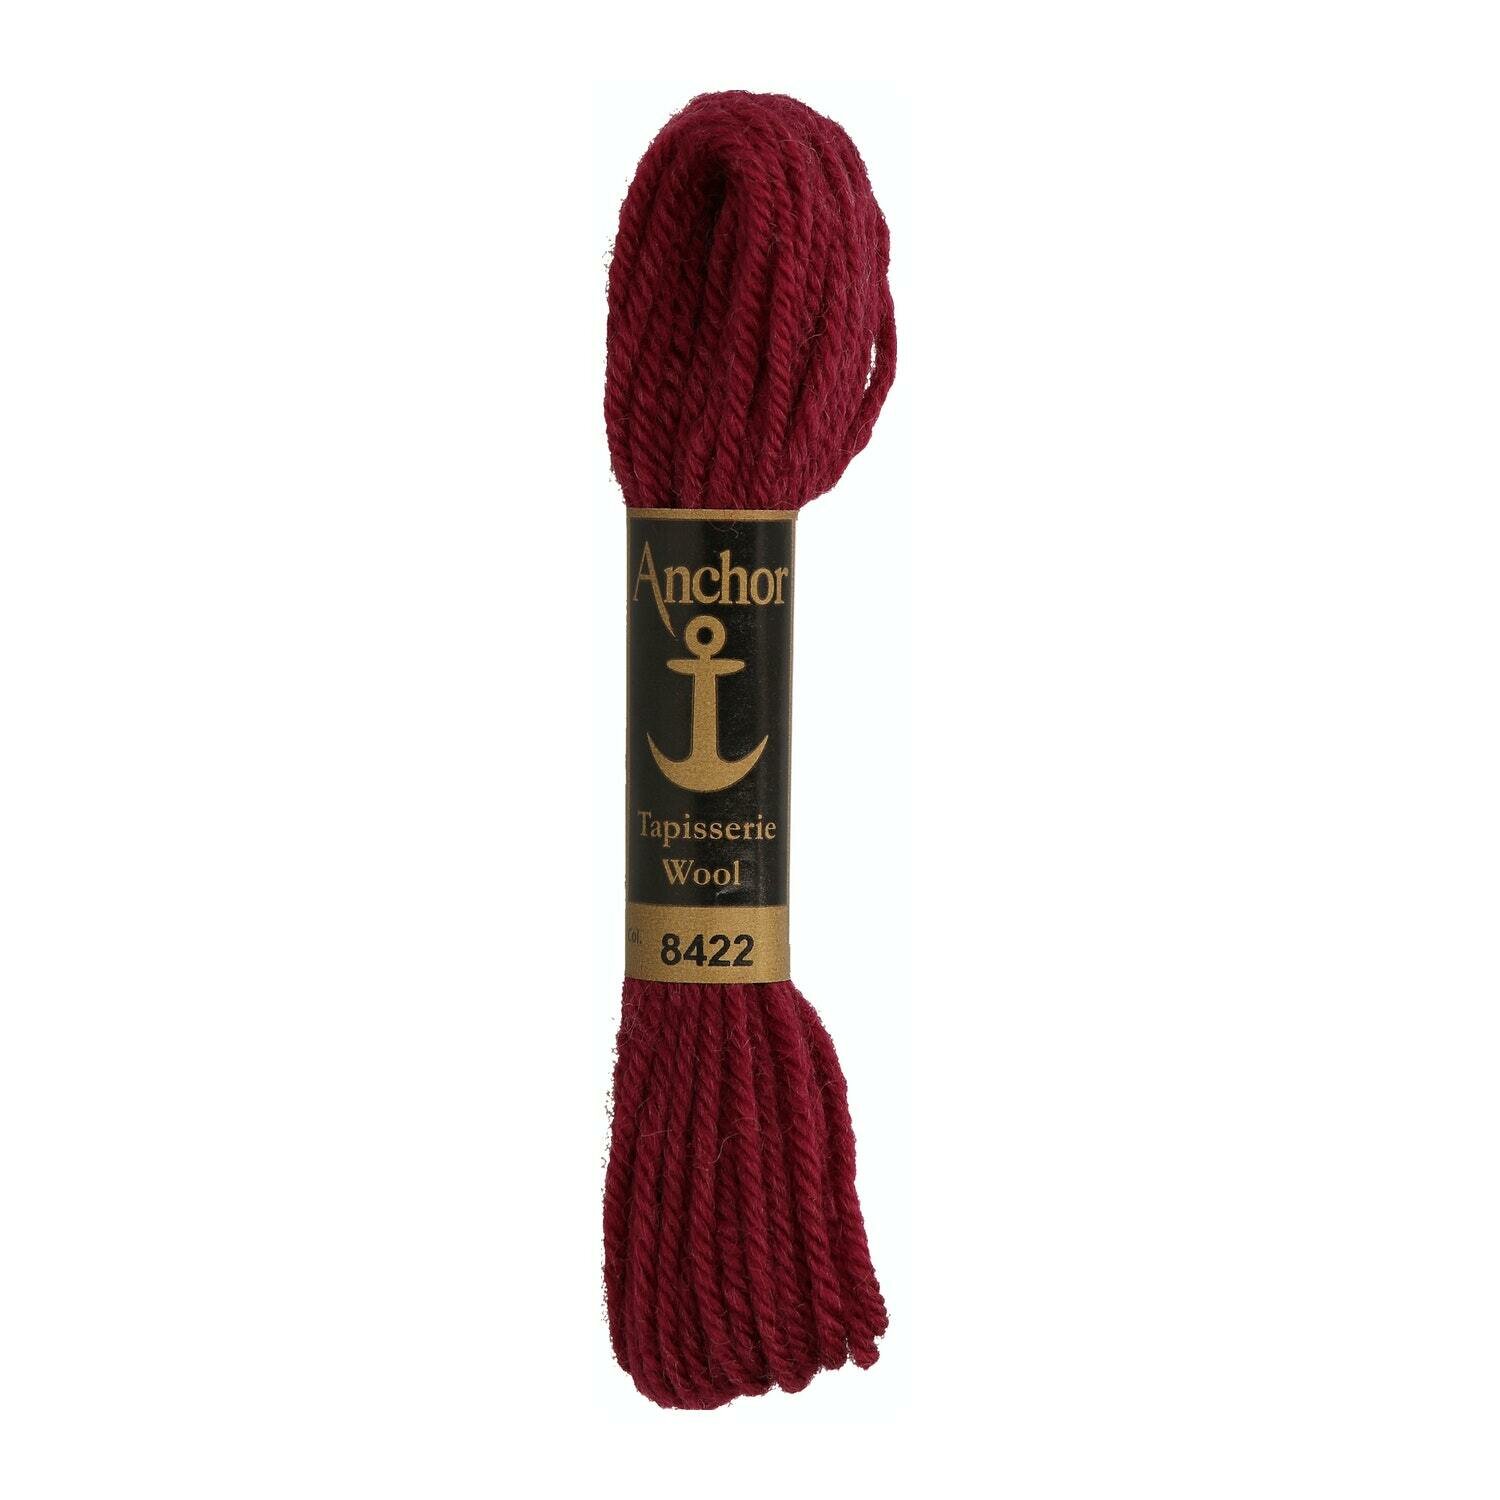 Anchor Tapisserie Wool #  08422